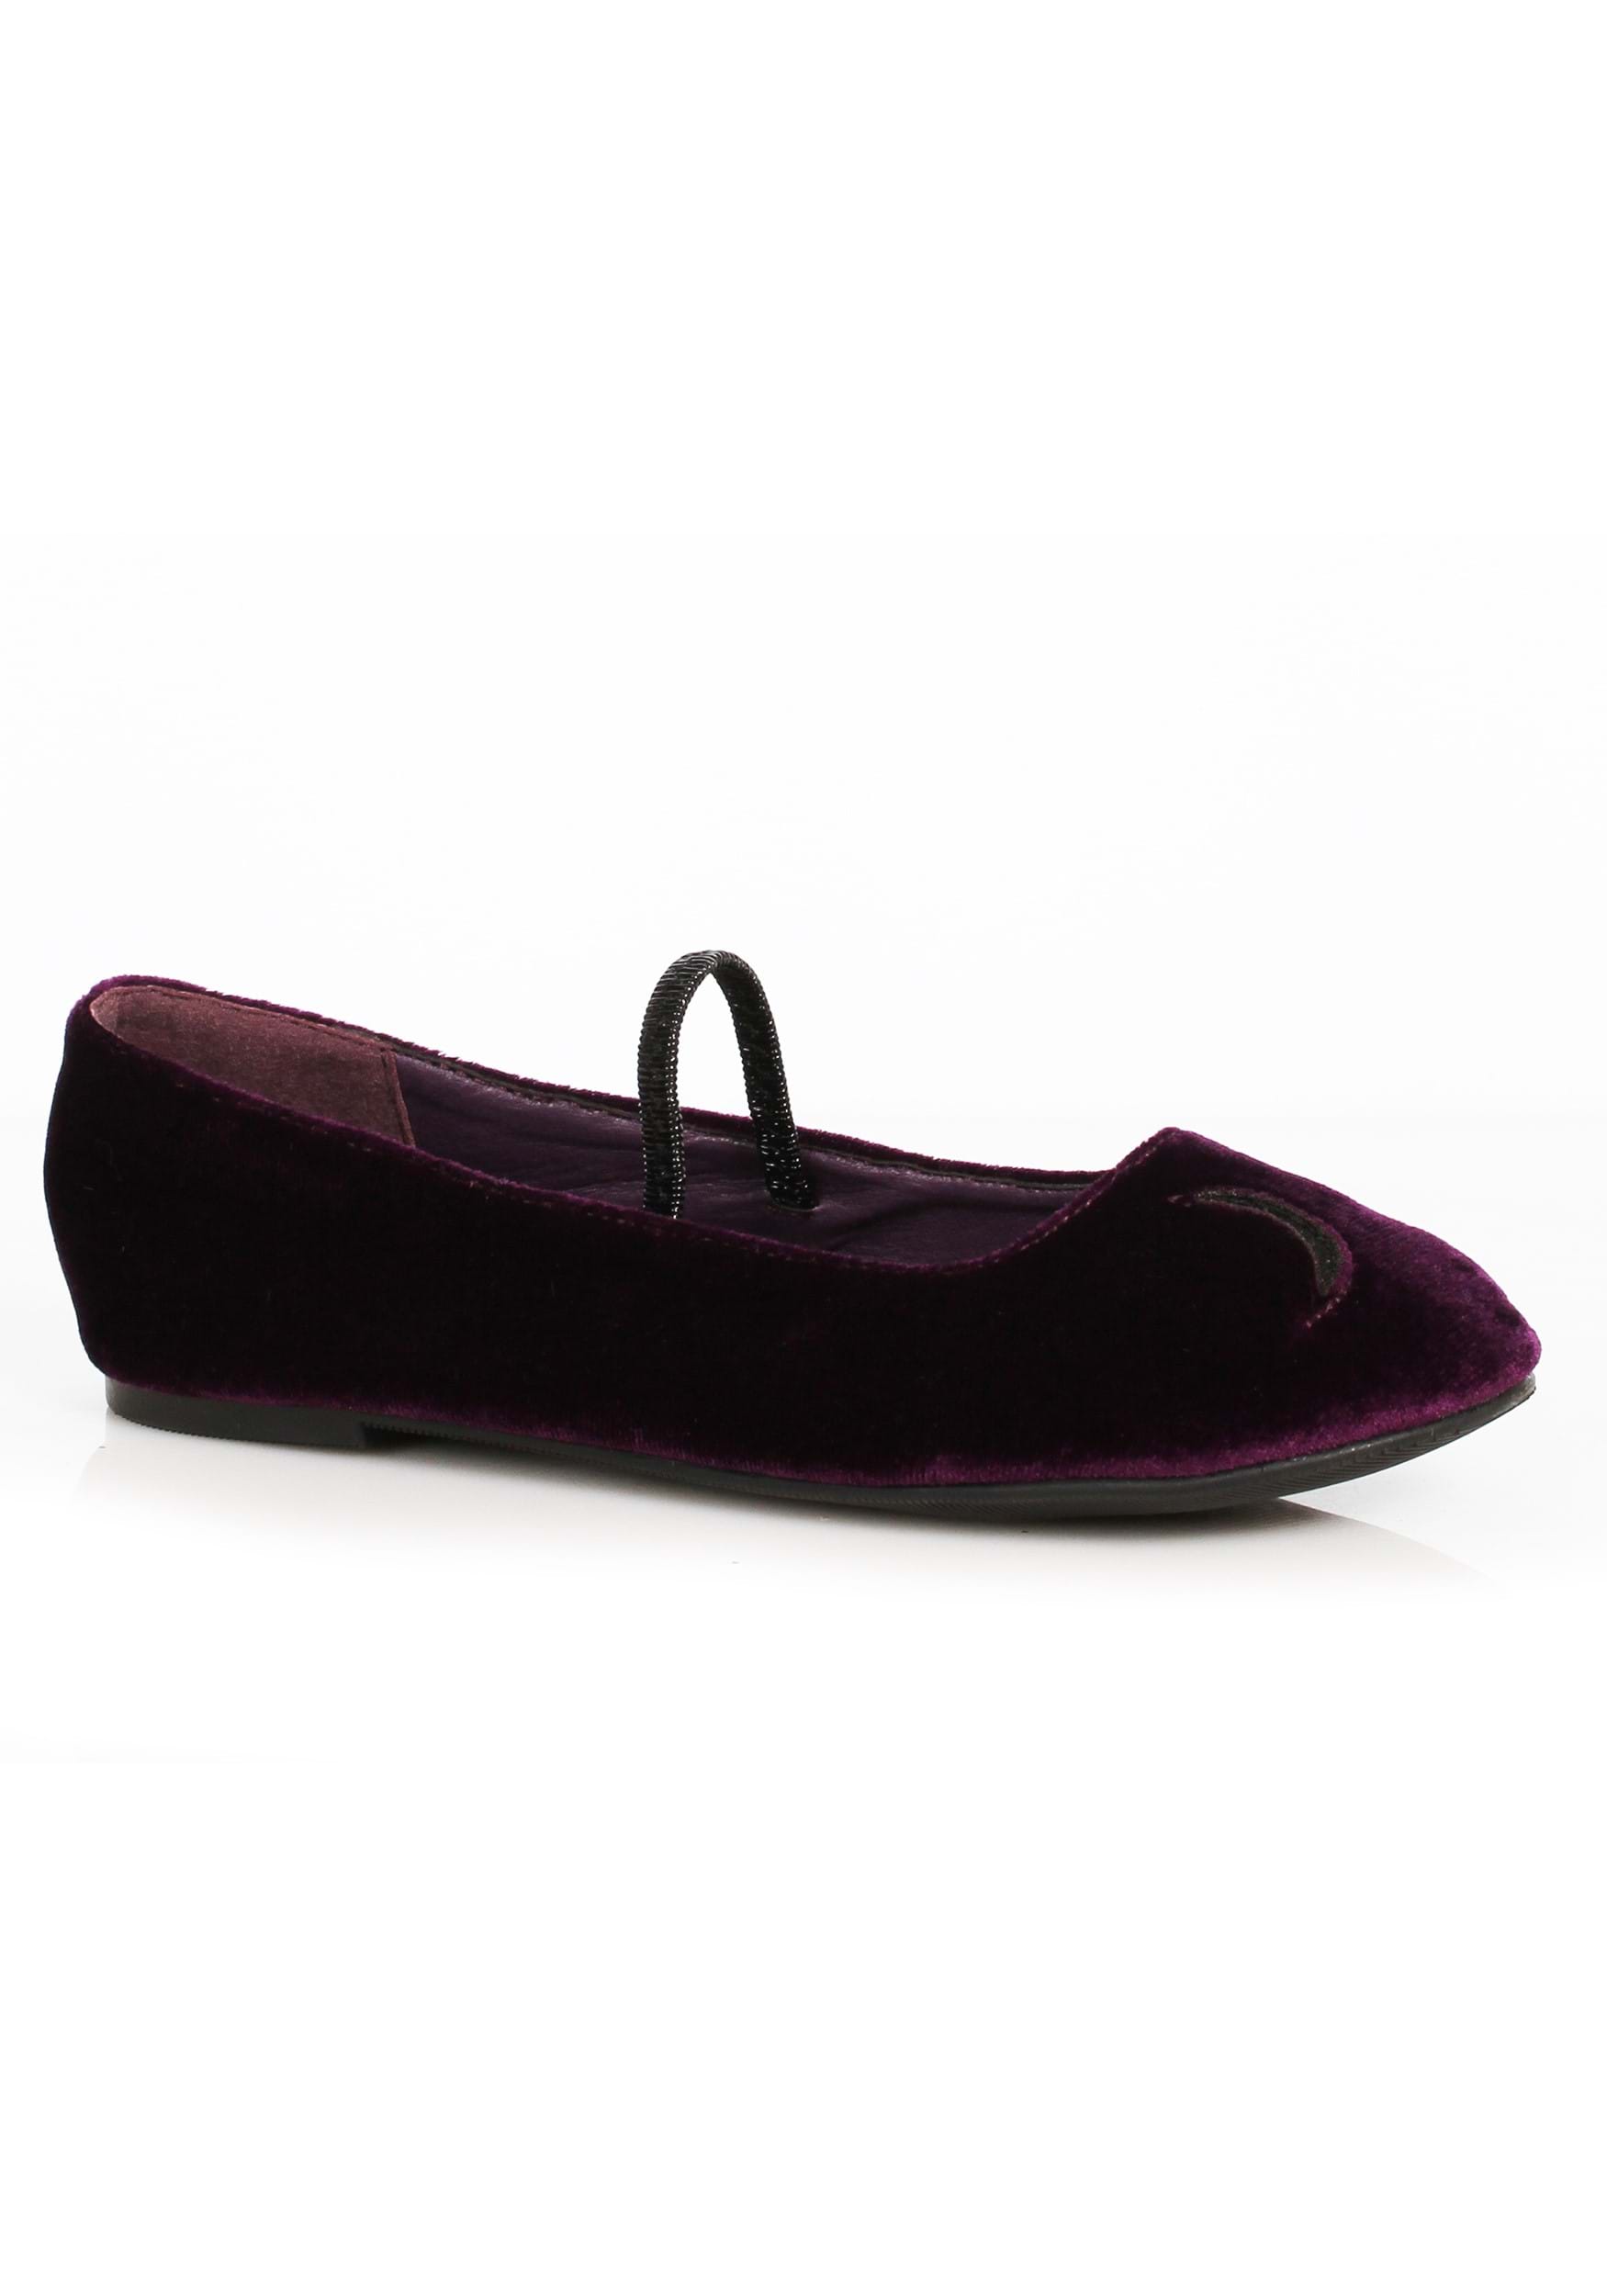 Purple Witch Flat Shoes for Girls